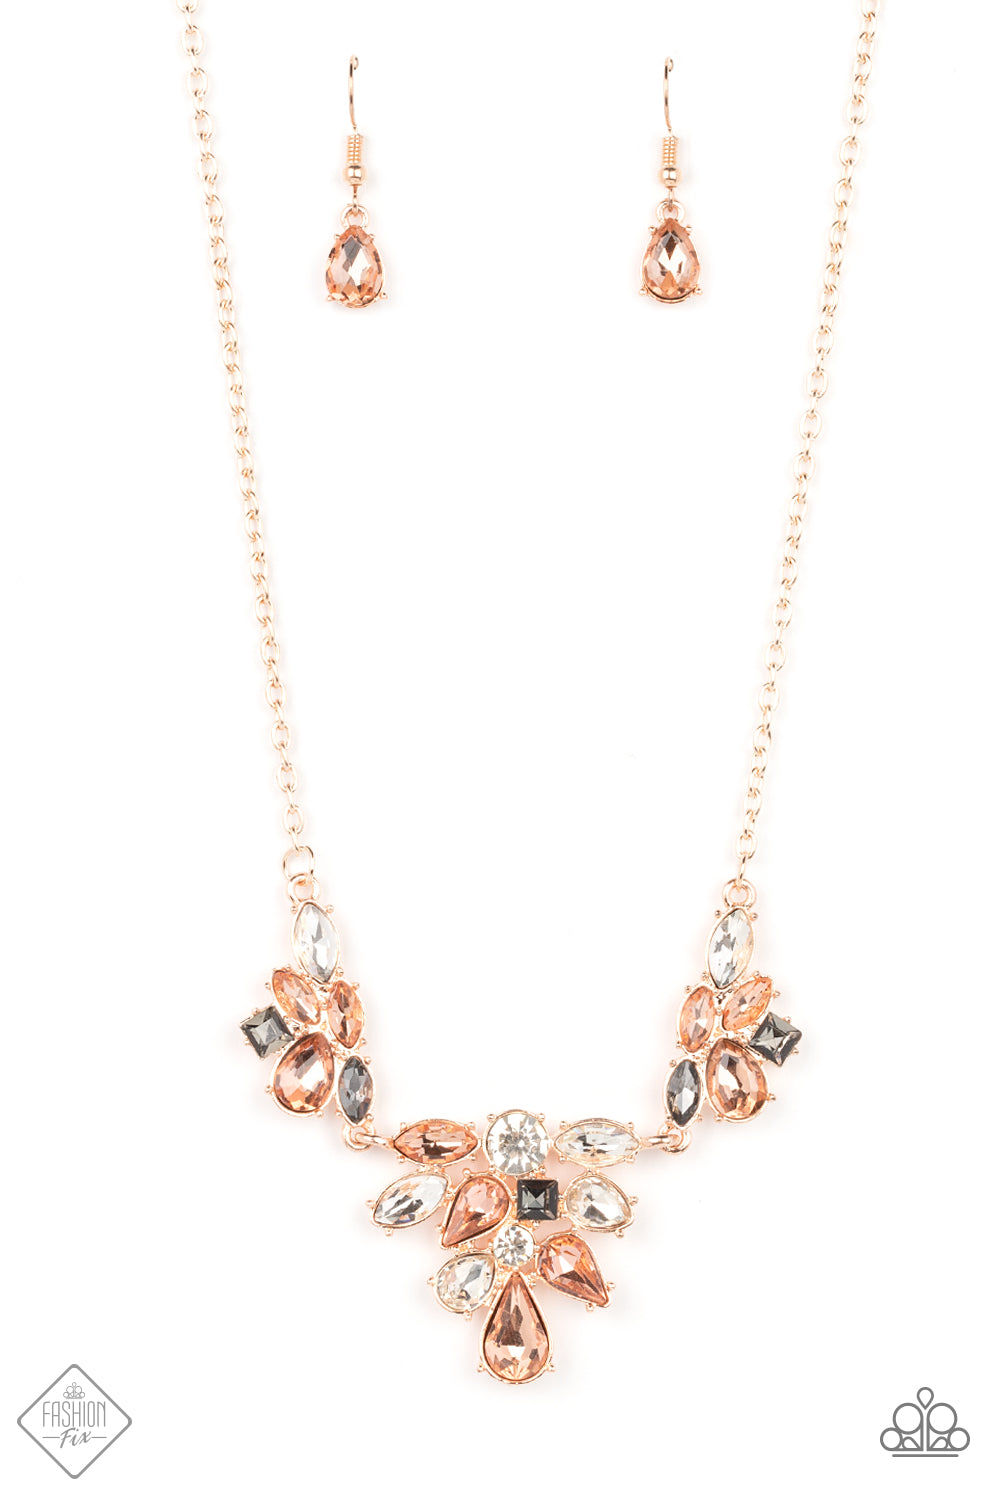 Paparazzi Lock Up Your Valuables Rose Gold Necklace & Earring Set